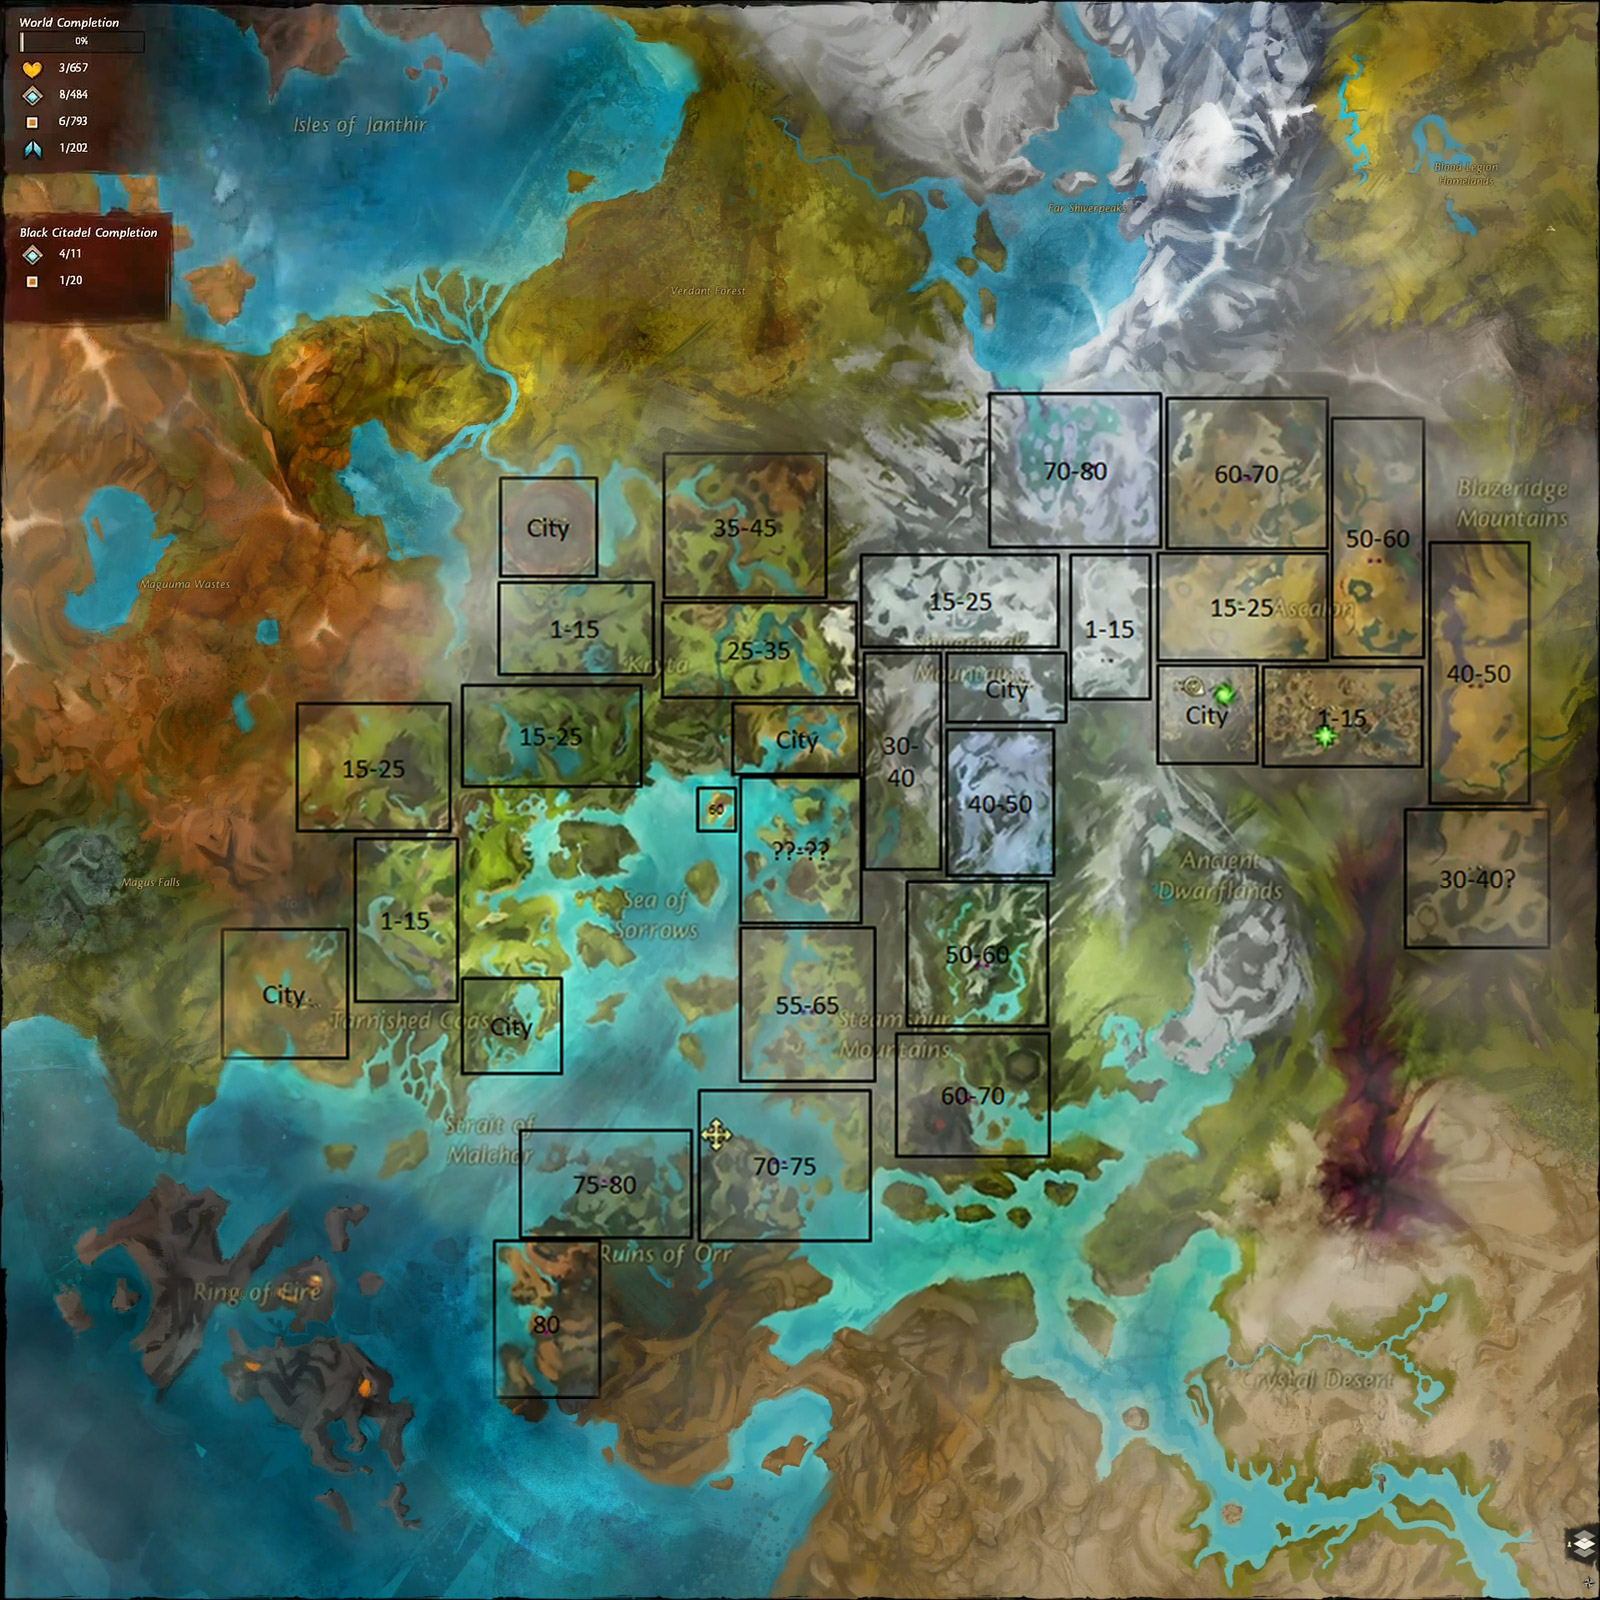 guild wars 2 world map Guild Wars 2 Map With Level Range Guild Wars 2 Life guild wars 2 world map